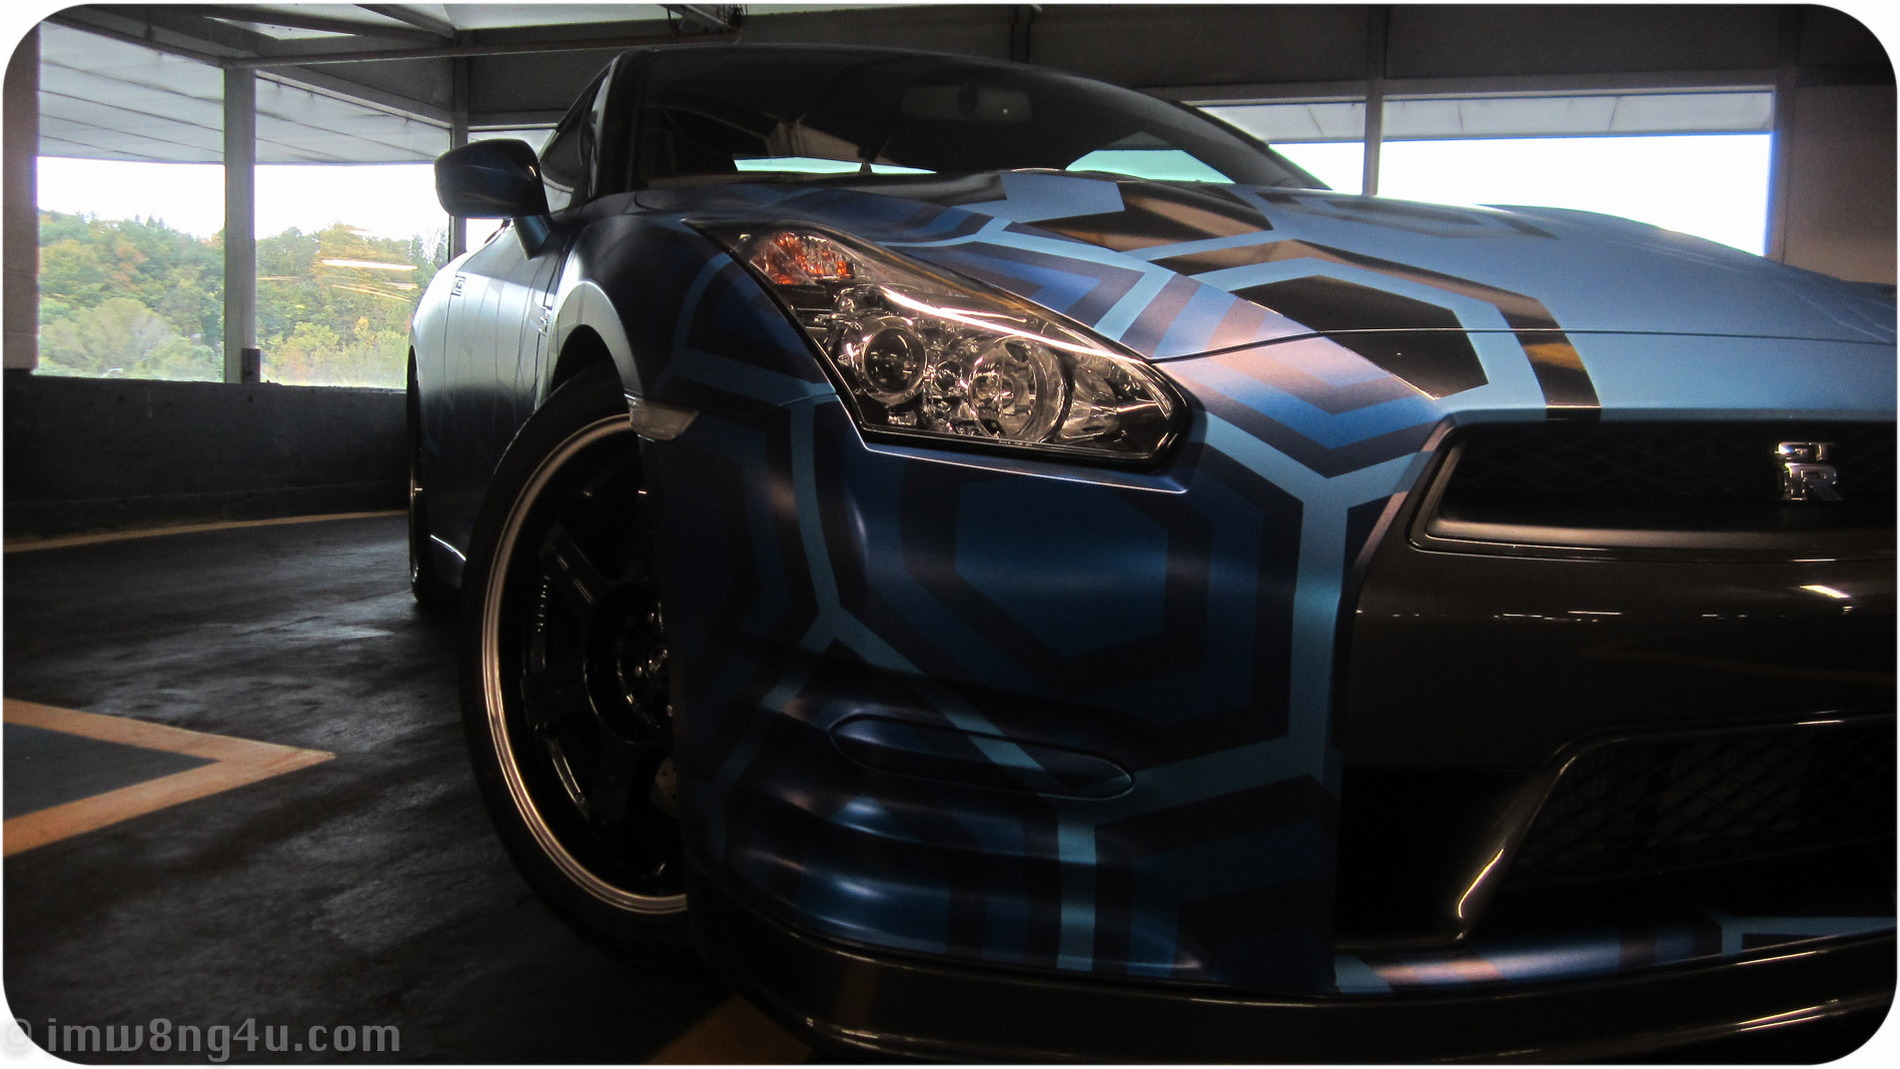 IMW8NG4U 3D-wrapped Nissan GT-R